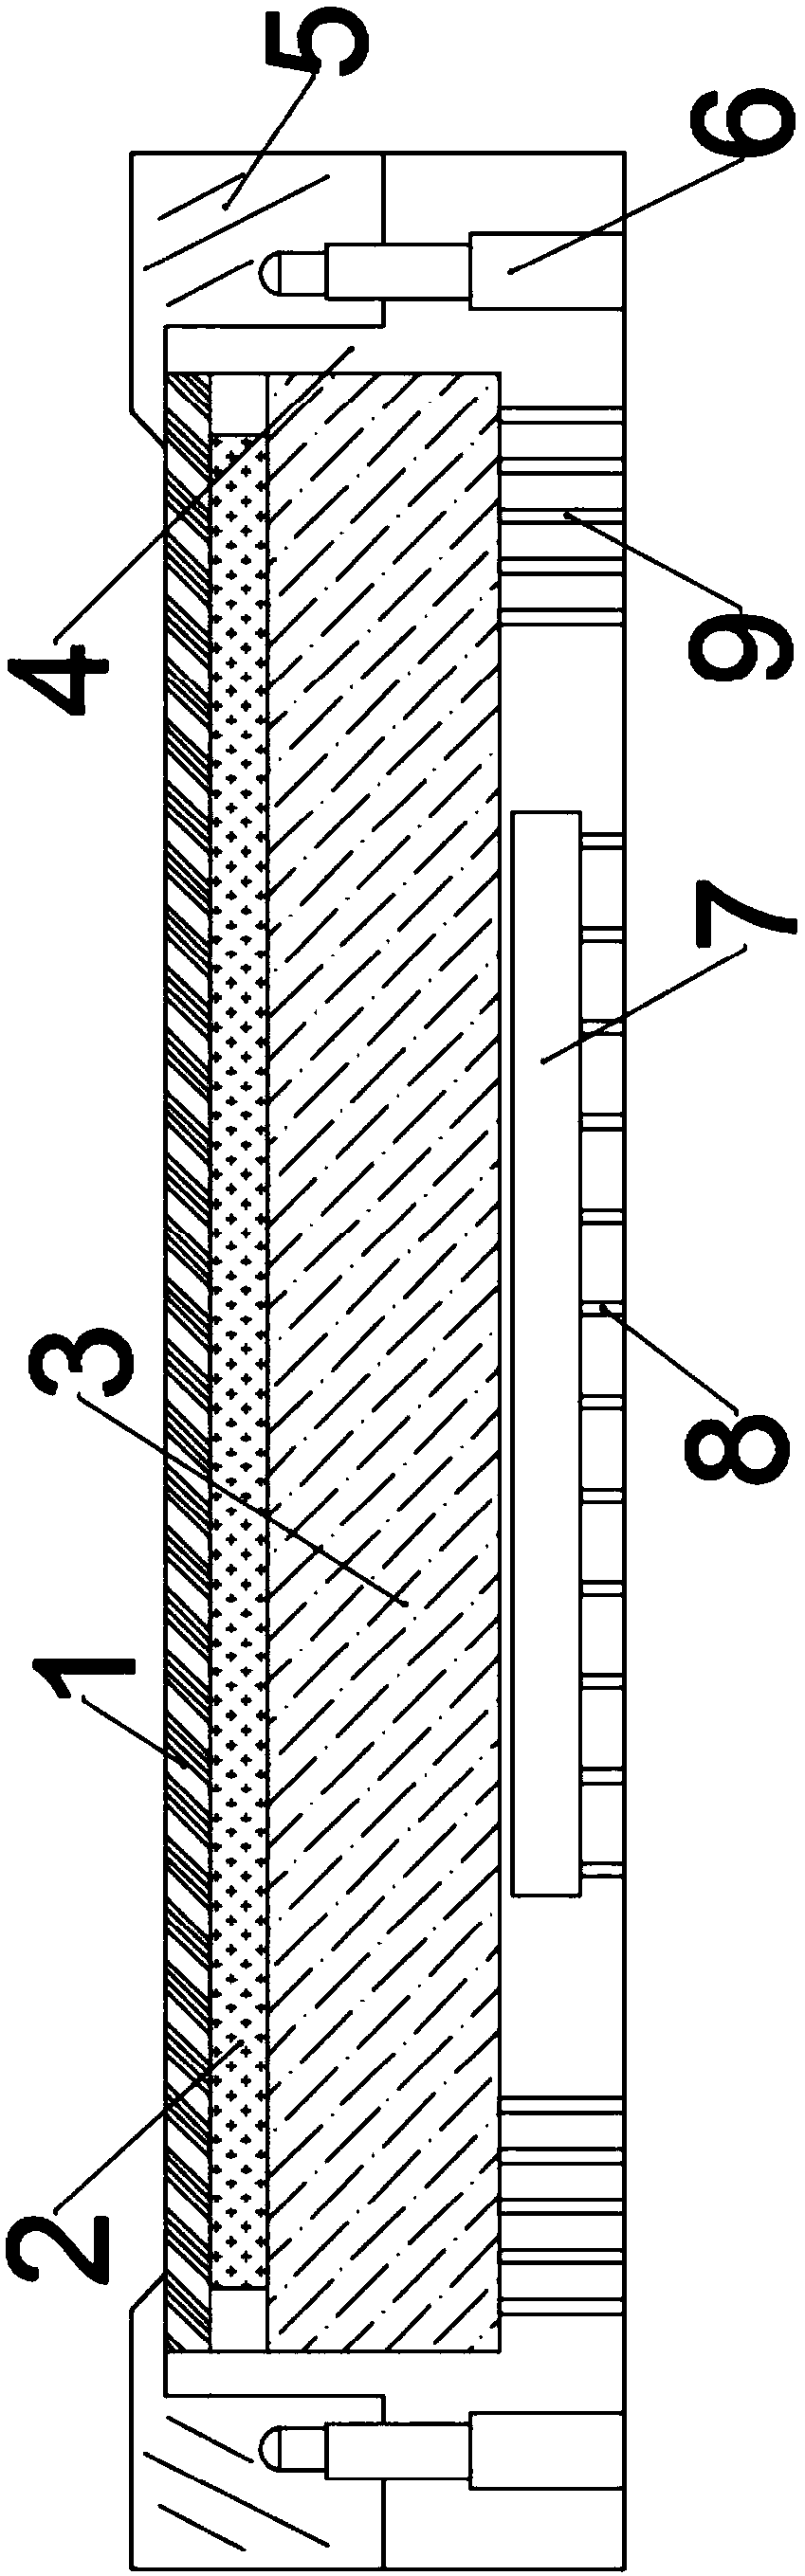 Air-permeable and heat-radiating AMOLED display device more streamlined in process